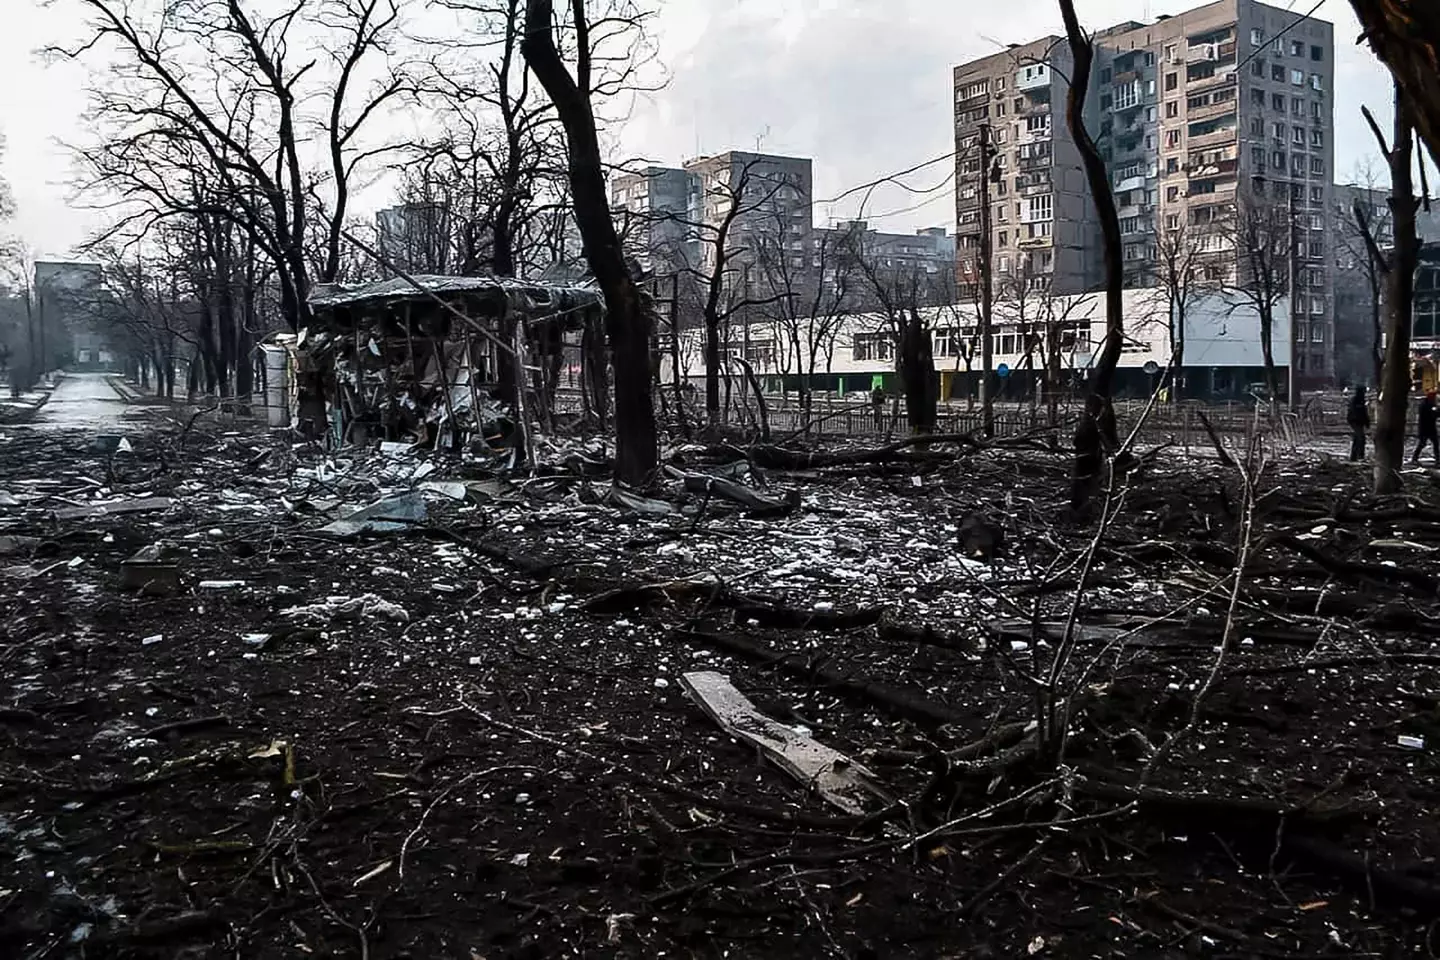 More than 2,00 people have been killed in Mariupol.